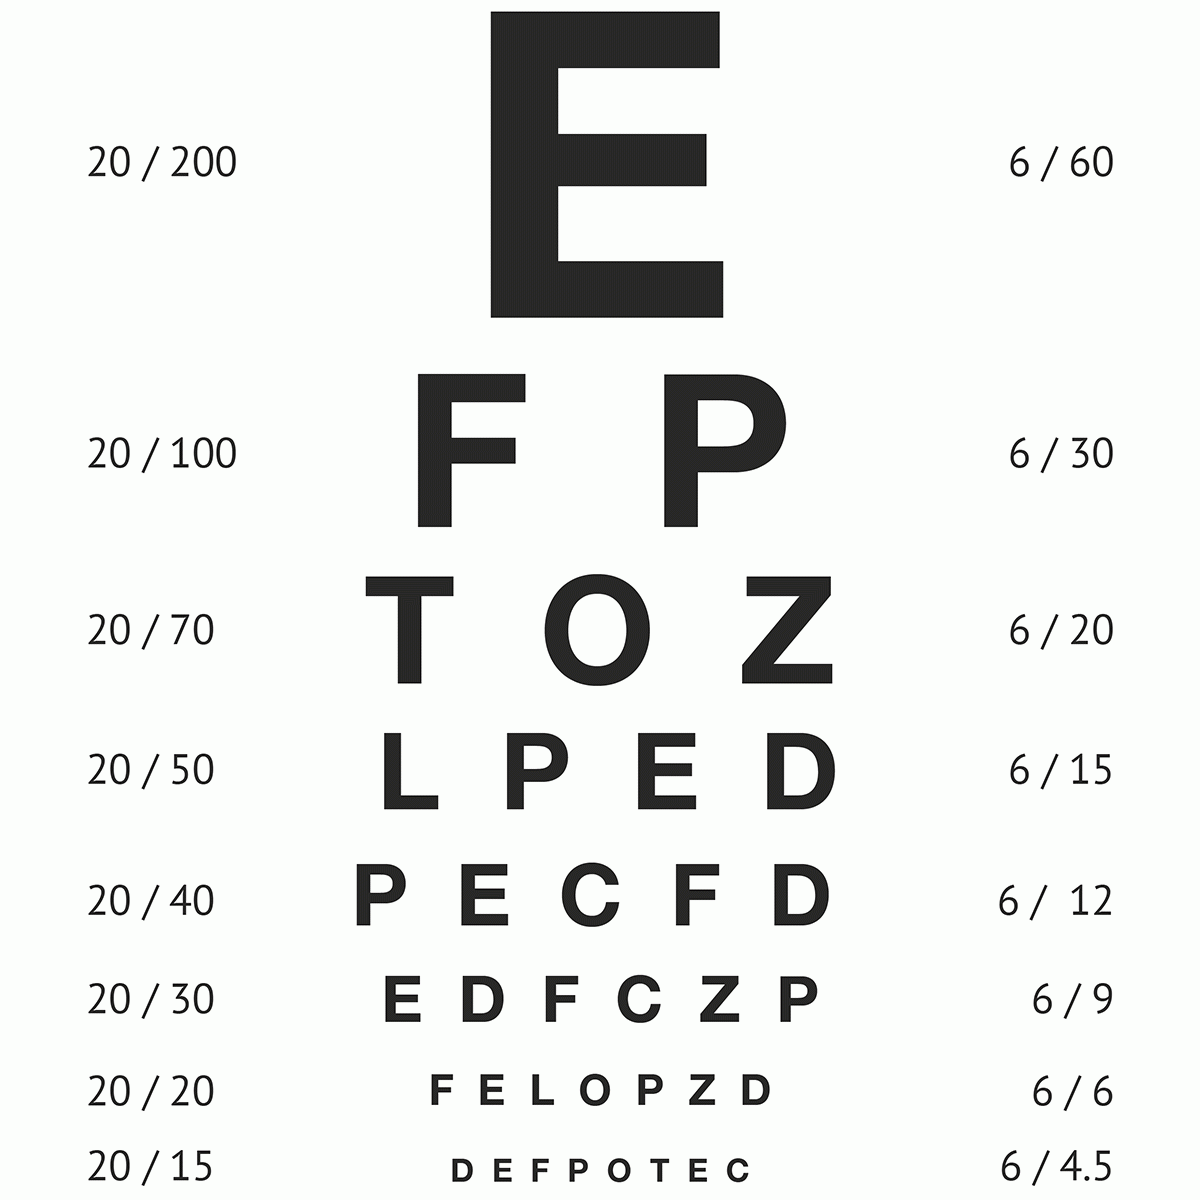 Reduced Visual Acuity Signs MedSchool